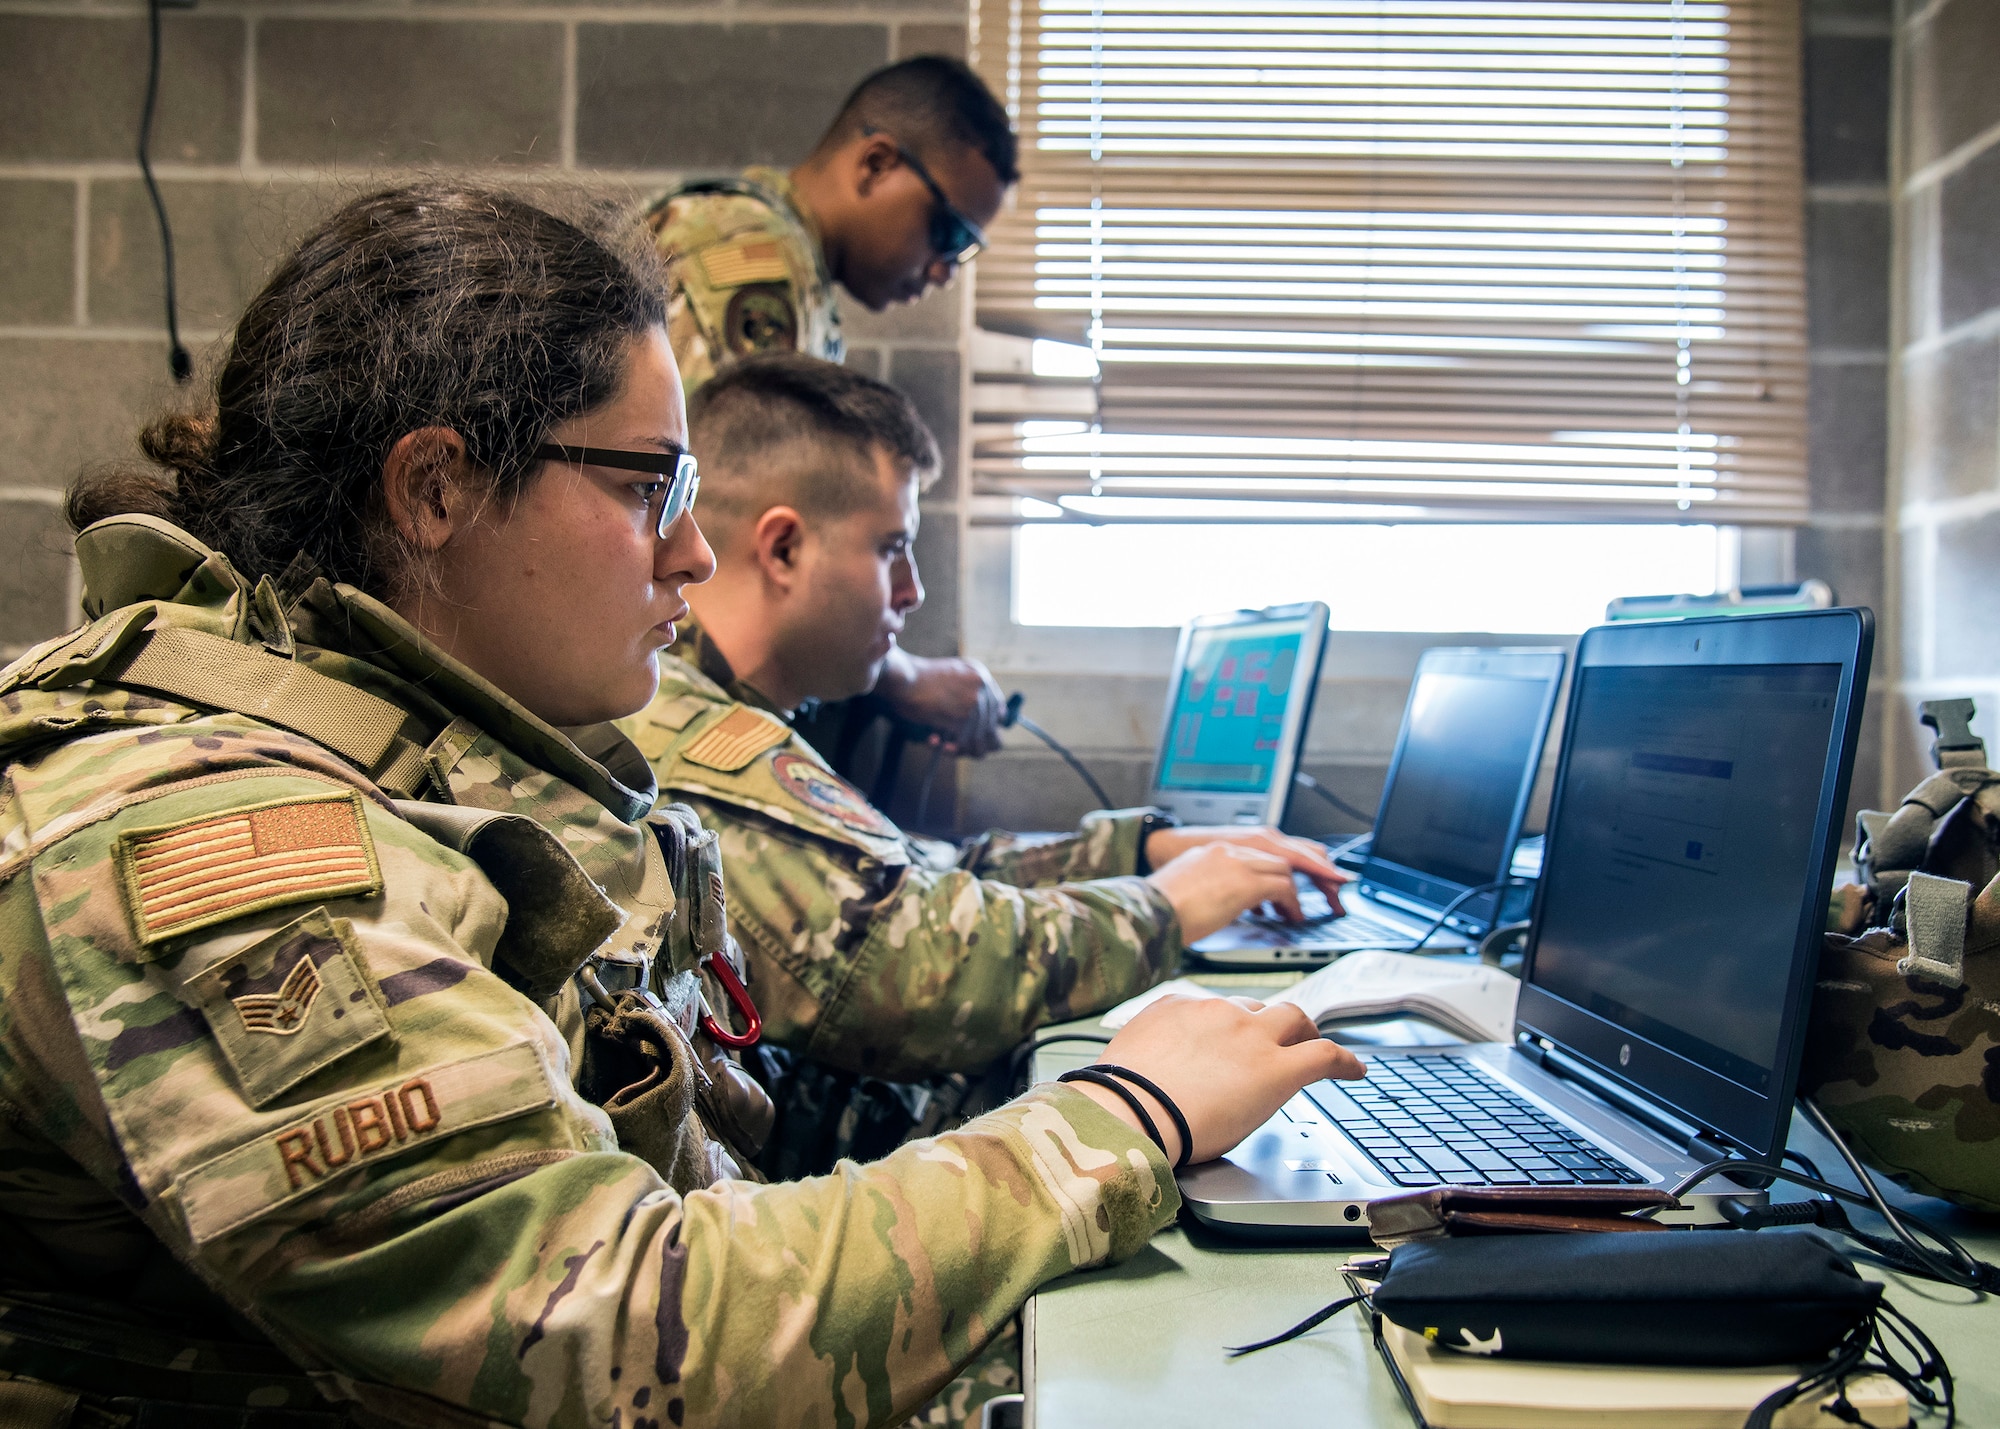 Staff Weather Officers from the 3d Weather Squadron (WS) input data into computers during a certification field exercise (CFX), July 29, 2019, at Camp Bowie Training Center, Texas. The CFX was designed to evaluate the squadron’s overall tactical ability and readiness to provide the U.S. Army with full spectrum environmental support to the Joint Task Force (JTF) fight. While deployed, the Army relies on the 3d WS to provide them with current ground weather reports. These reports are then employed by commanders on the ground as they plan the best tactics and approaches to accomplish the mission. (U.S. Air Force photo by Airman 1st Class Eugene Oliver)